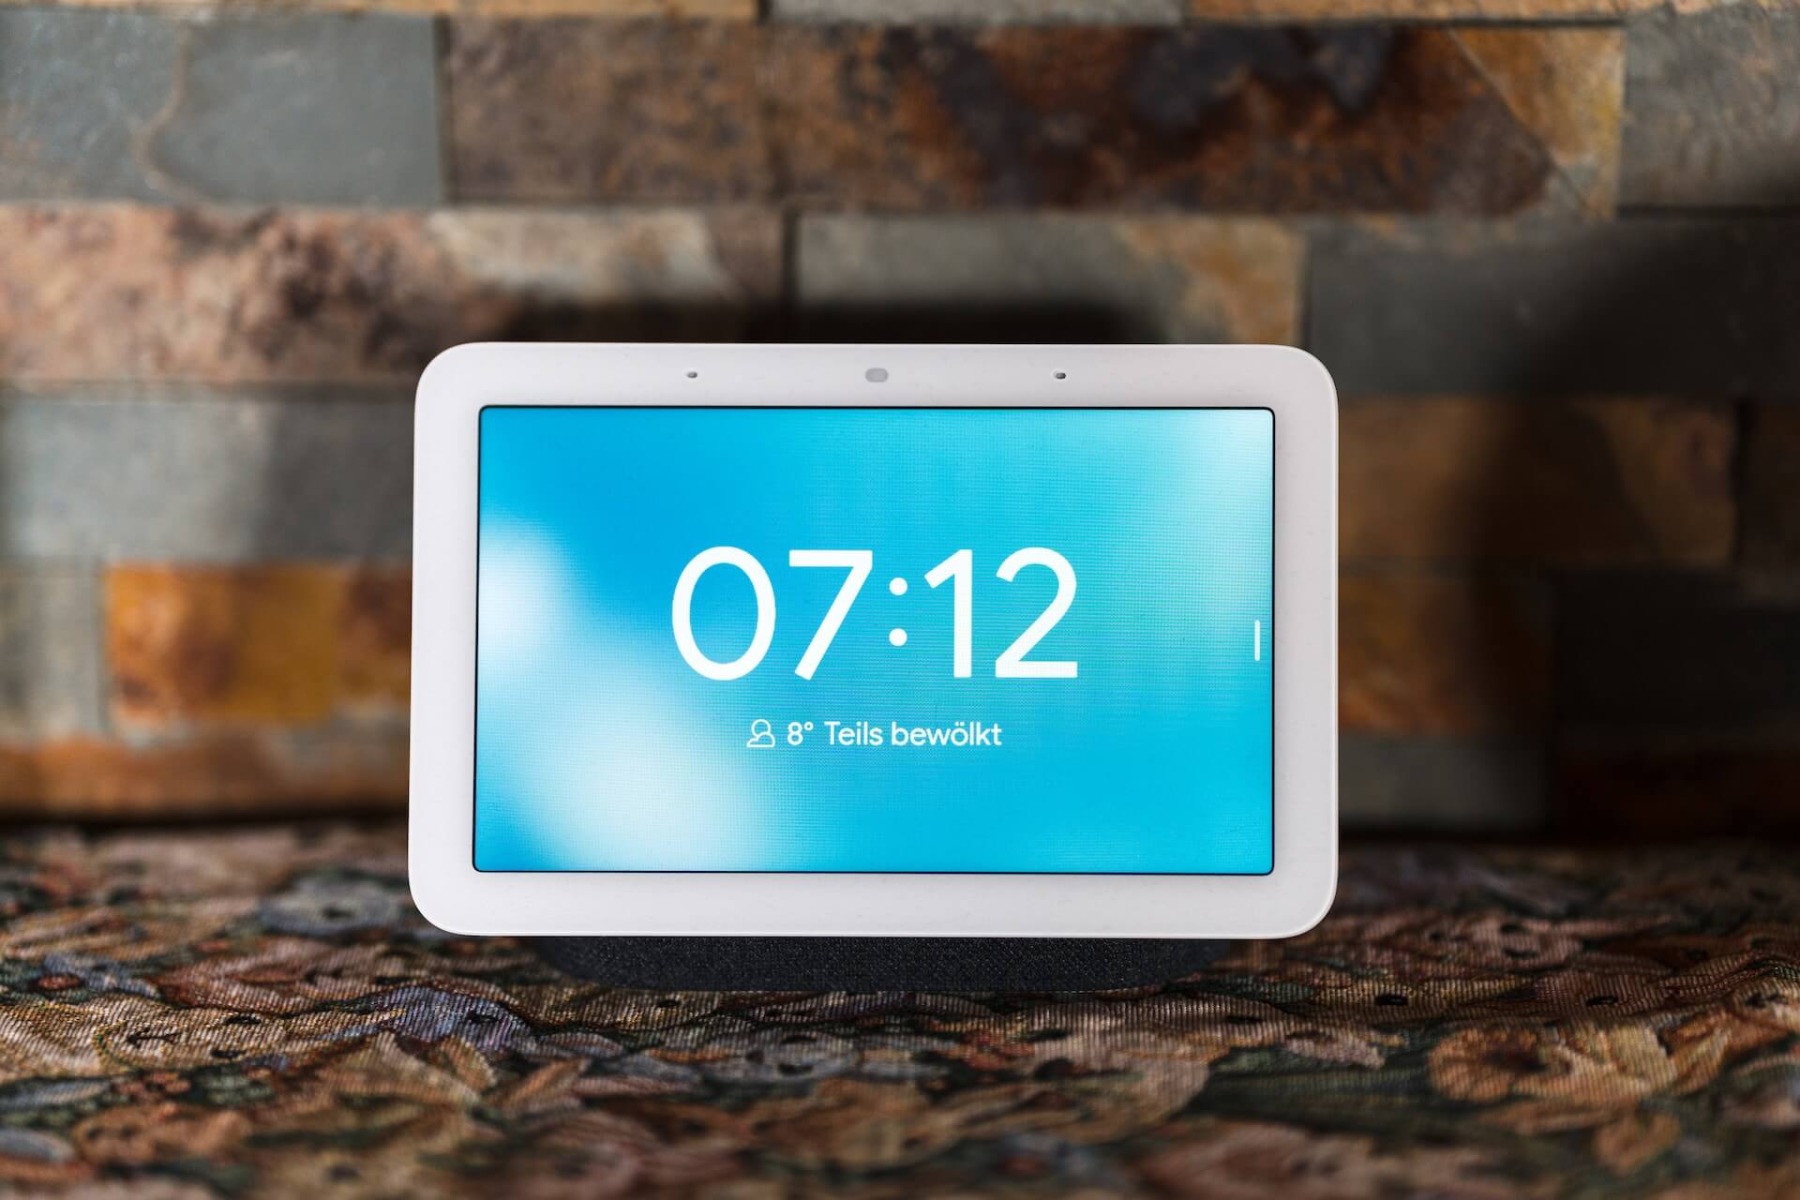 What is Google Nest Hub (2nd Generation)? With its mics, you can command from far away to check the news, watch a show, or keep an eye on the front door